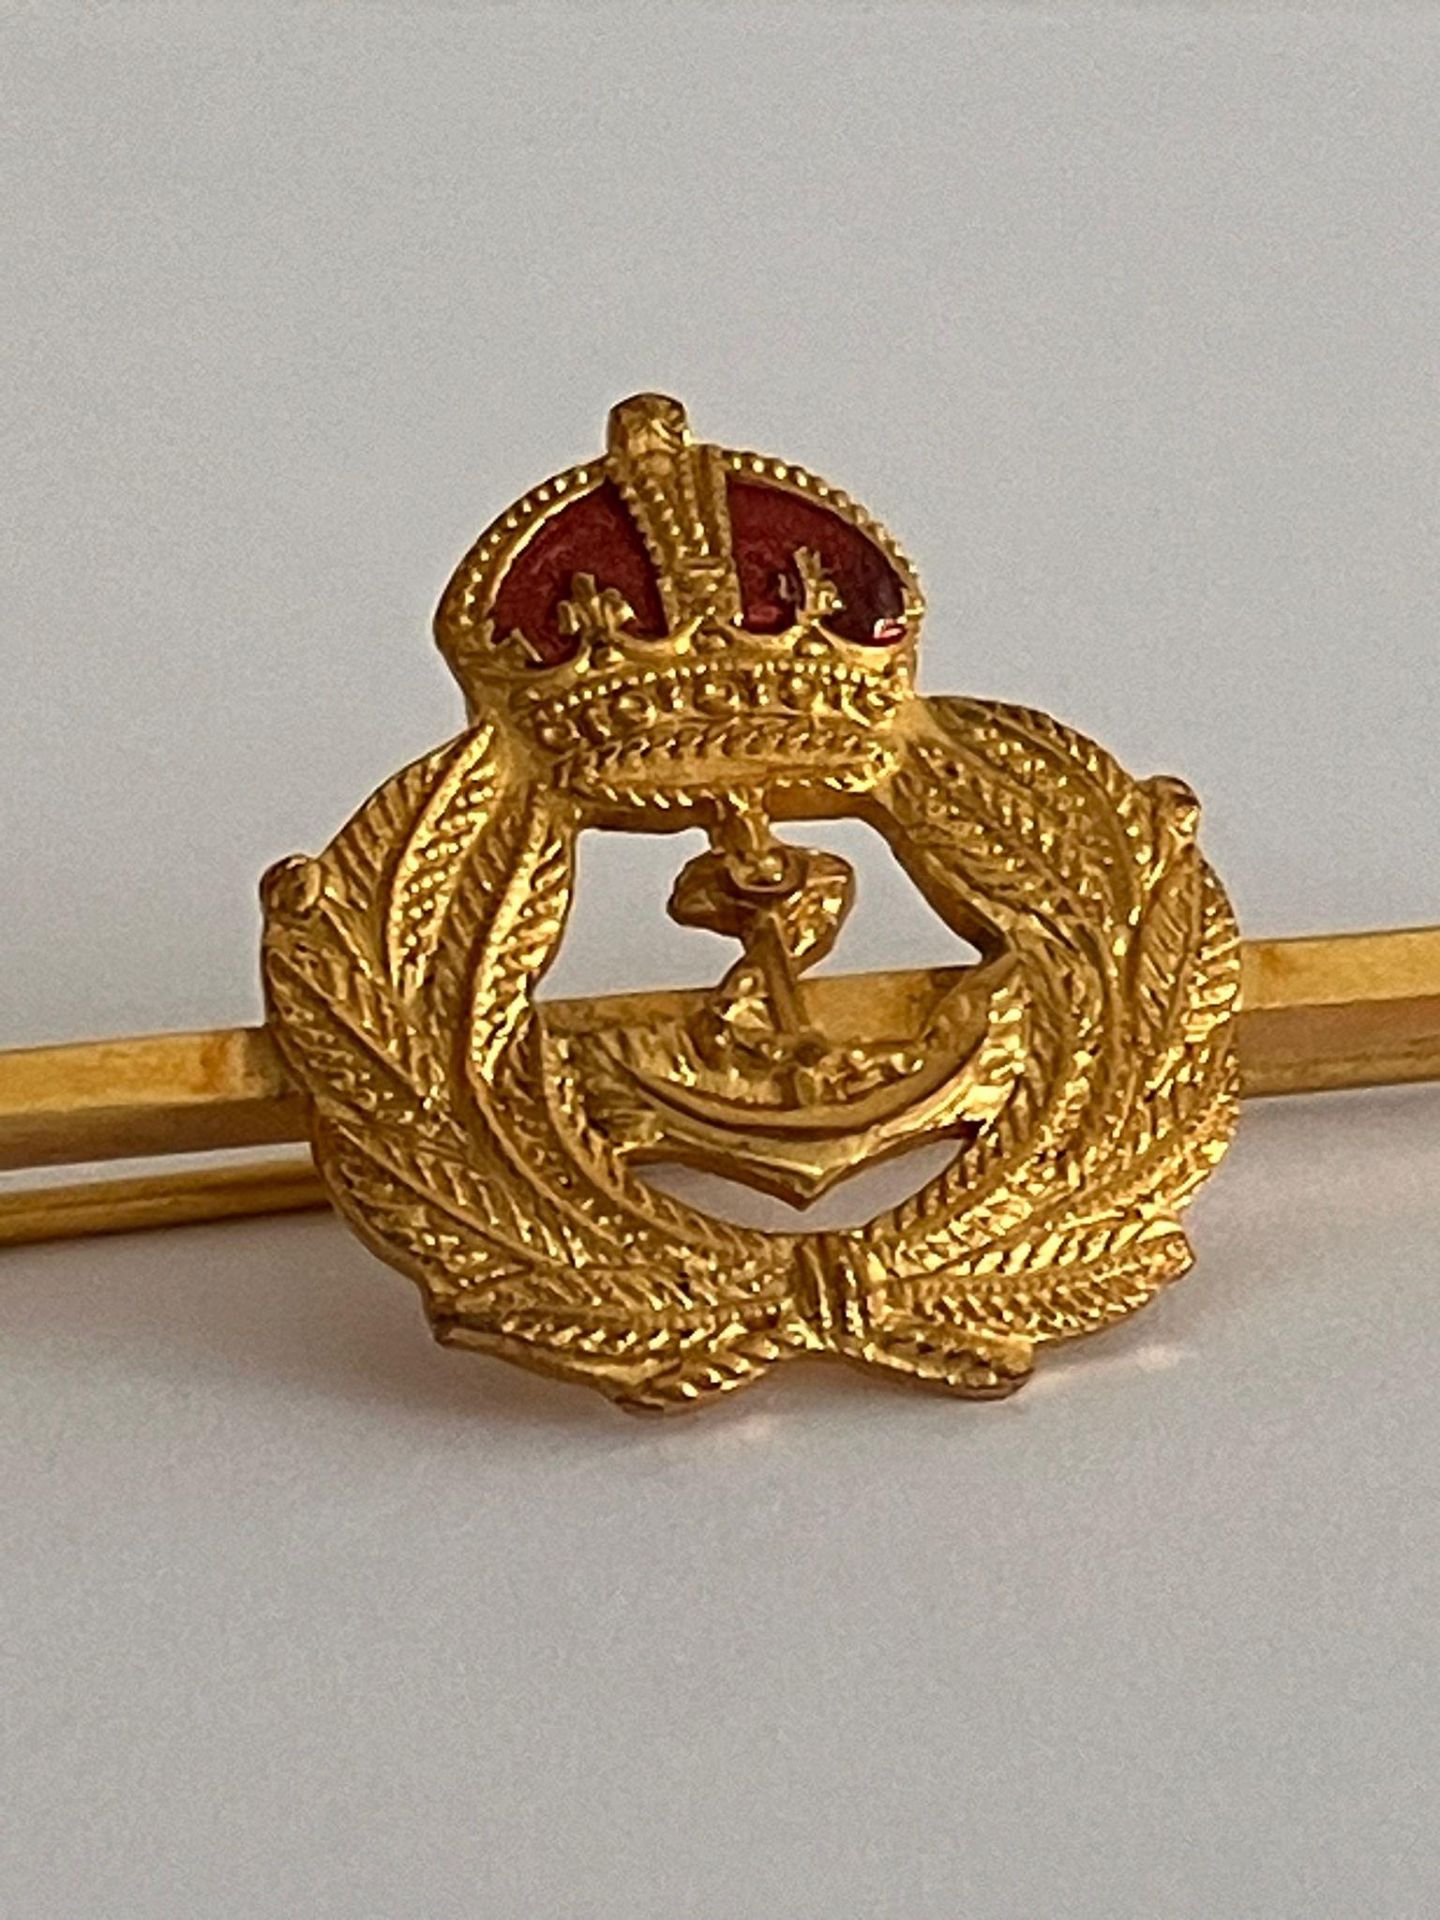 Rare World War I ROYAL NAVY SWEETHEART BROOCH. Gold Plated with red enamel detail. Excellent - Image 3 of 3